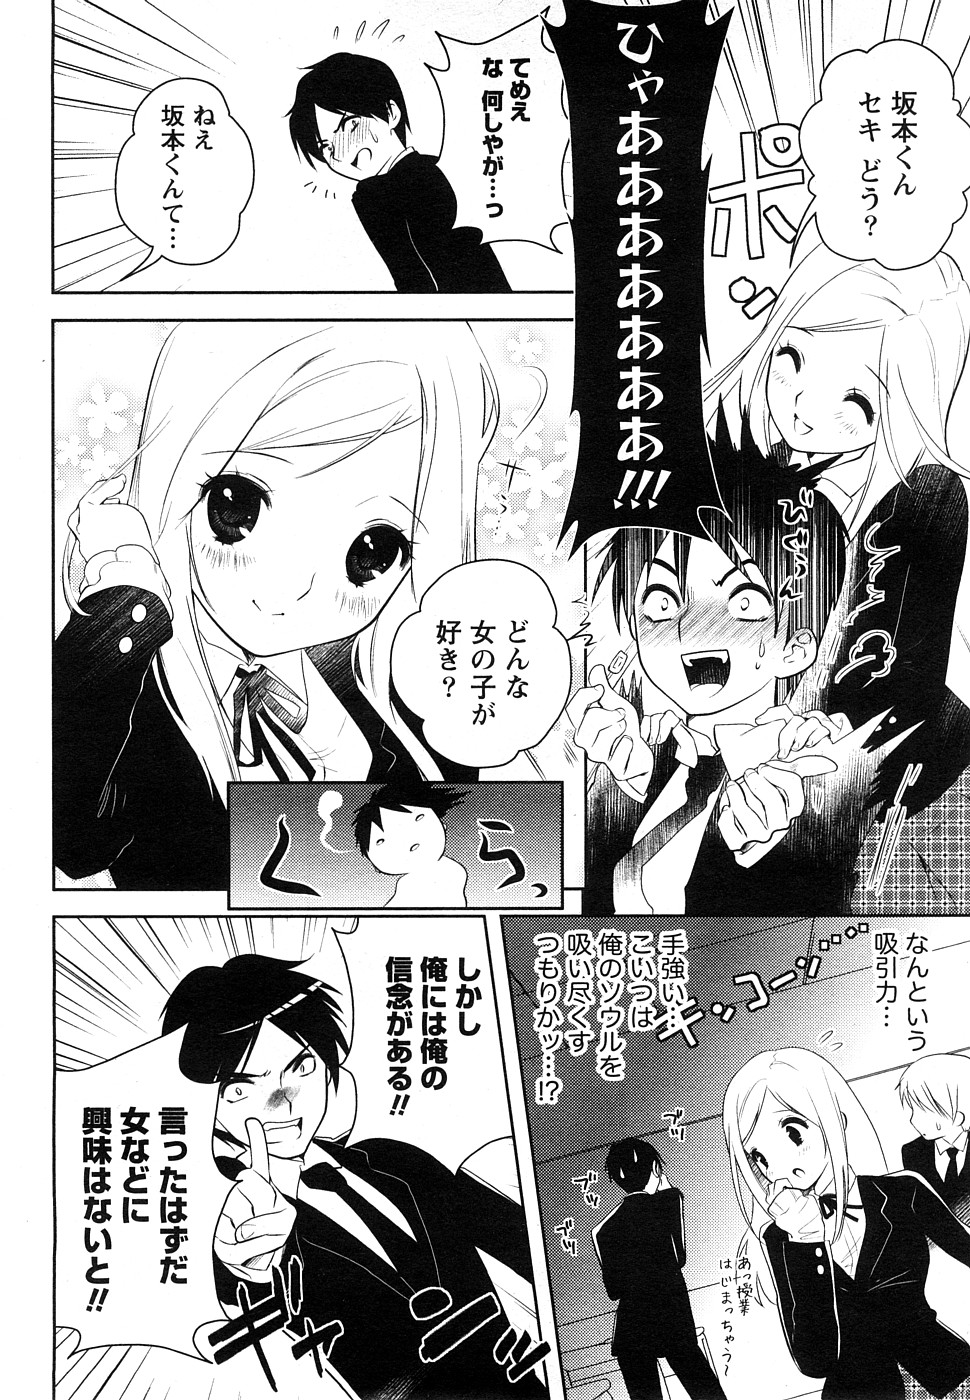 Comic Marble Vol.9 [2009-2] page 45 full